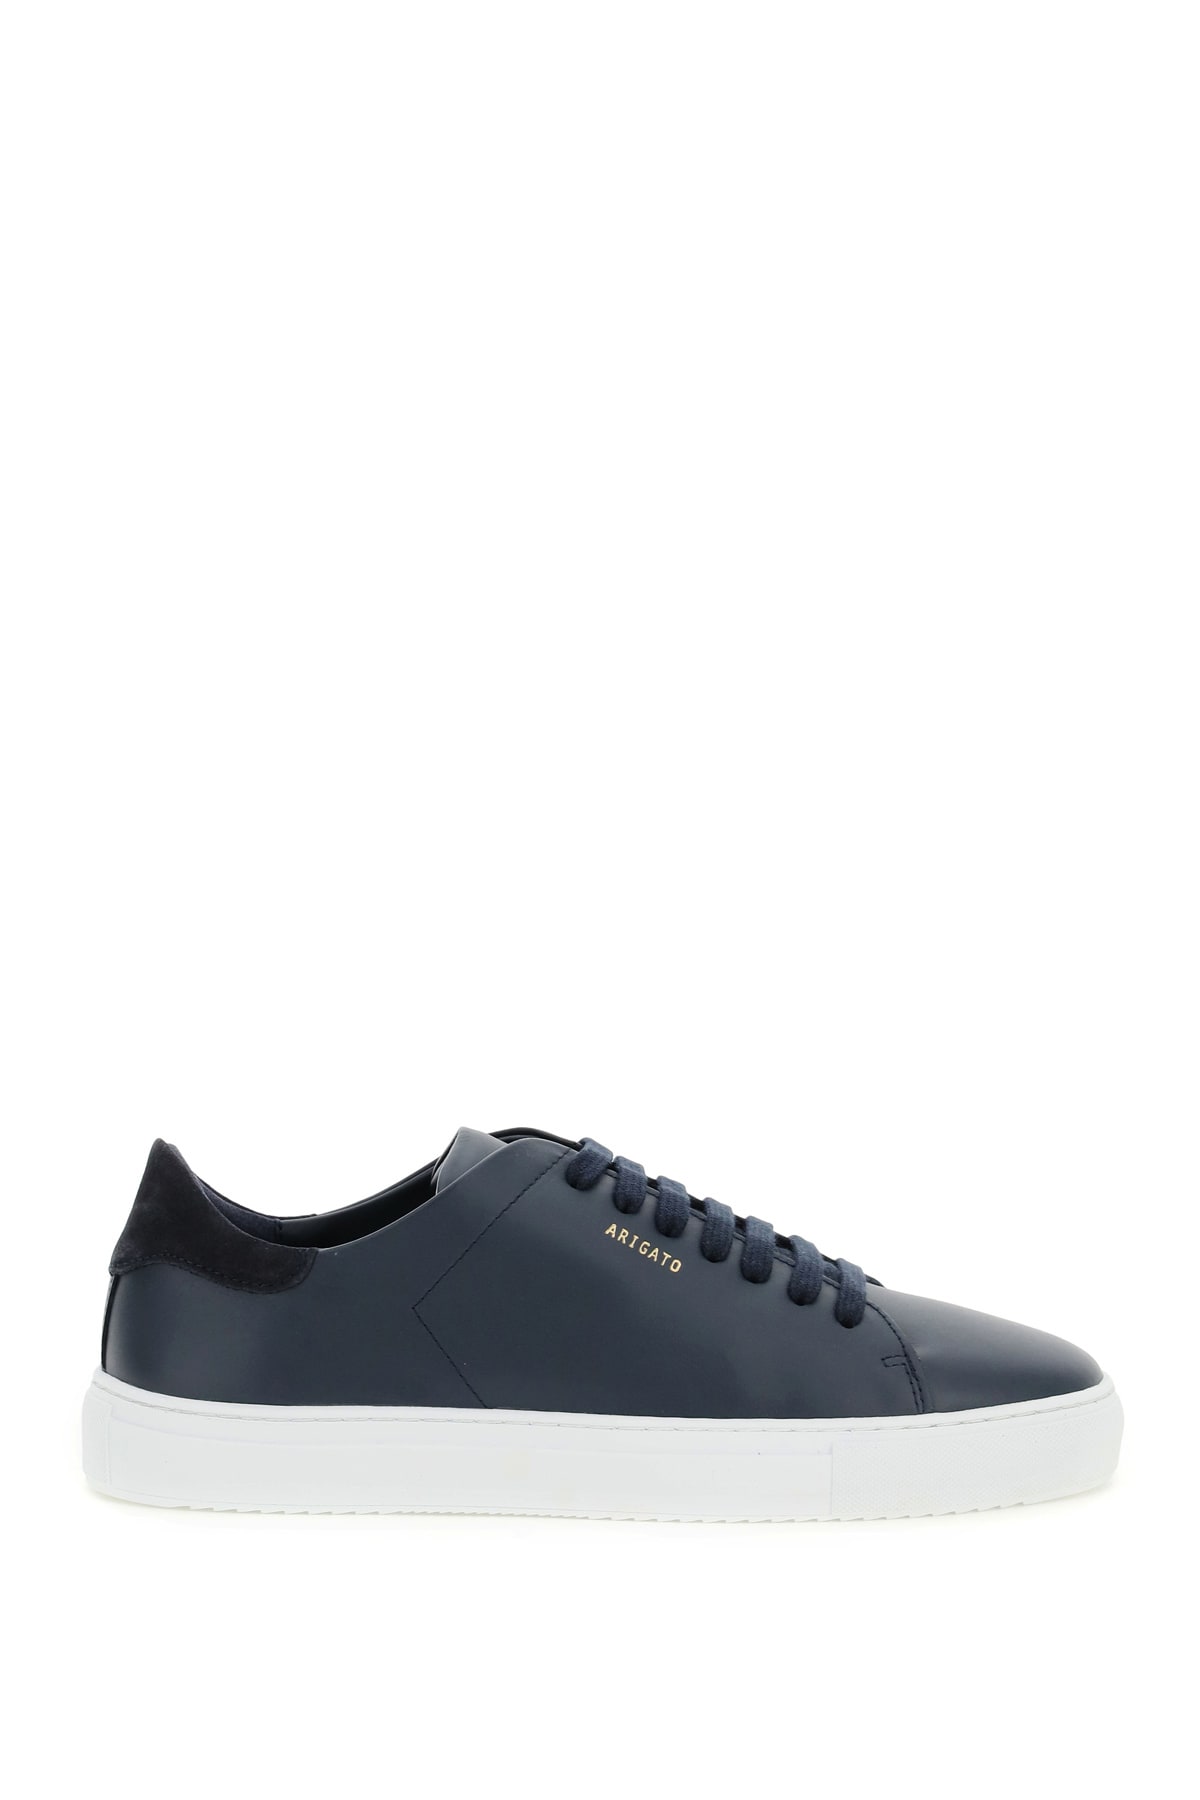 Axel Arigato clean 90 Leather Sneakers